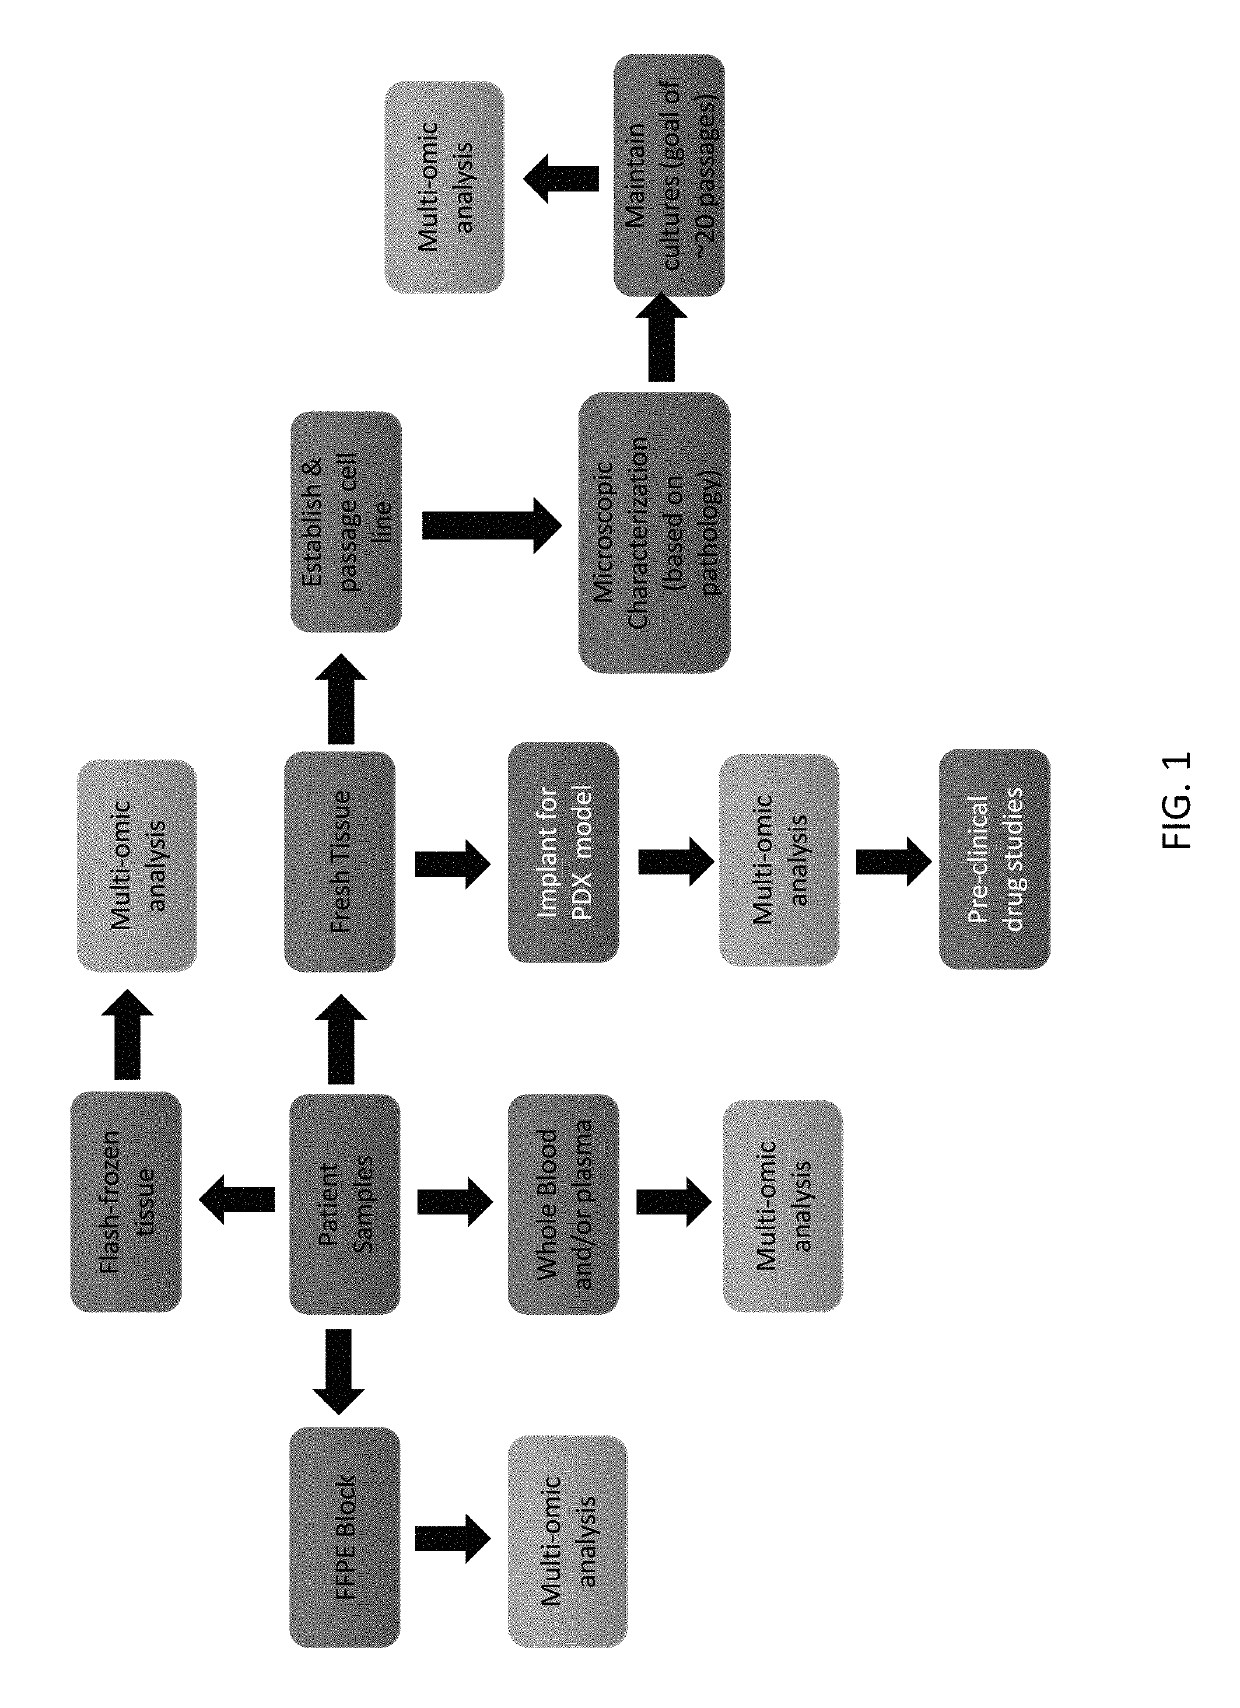 Systems and methods for preclinical models of metastases